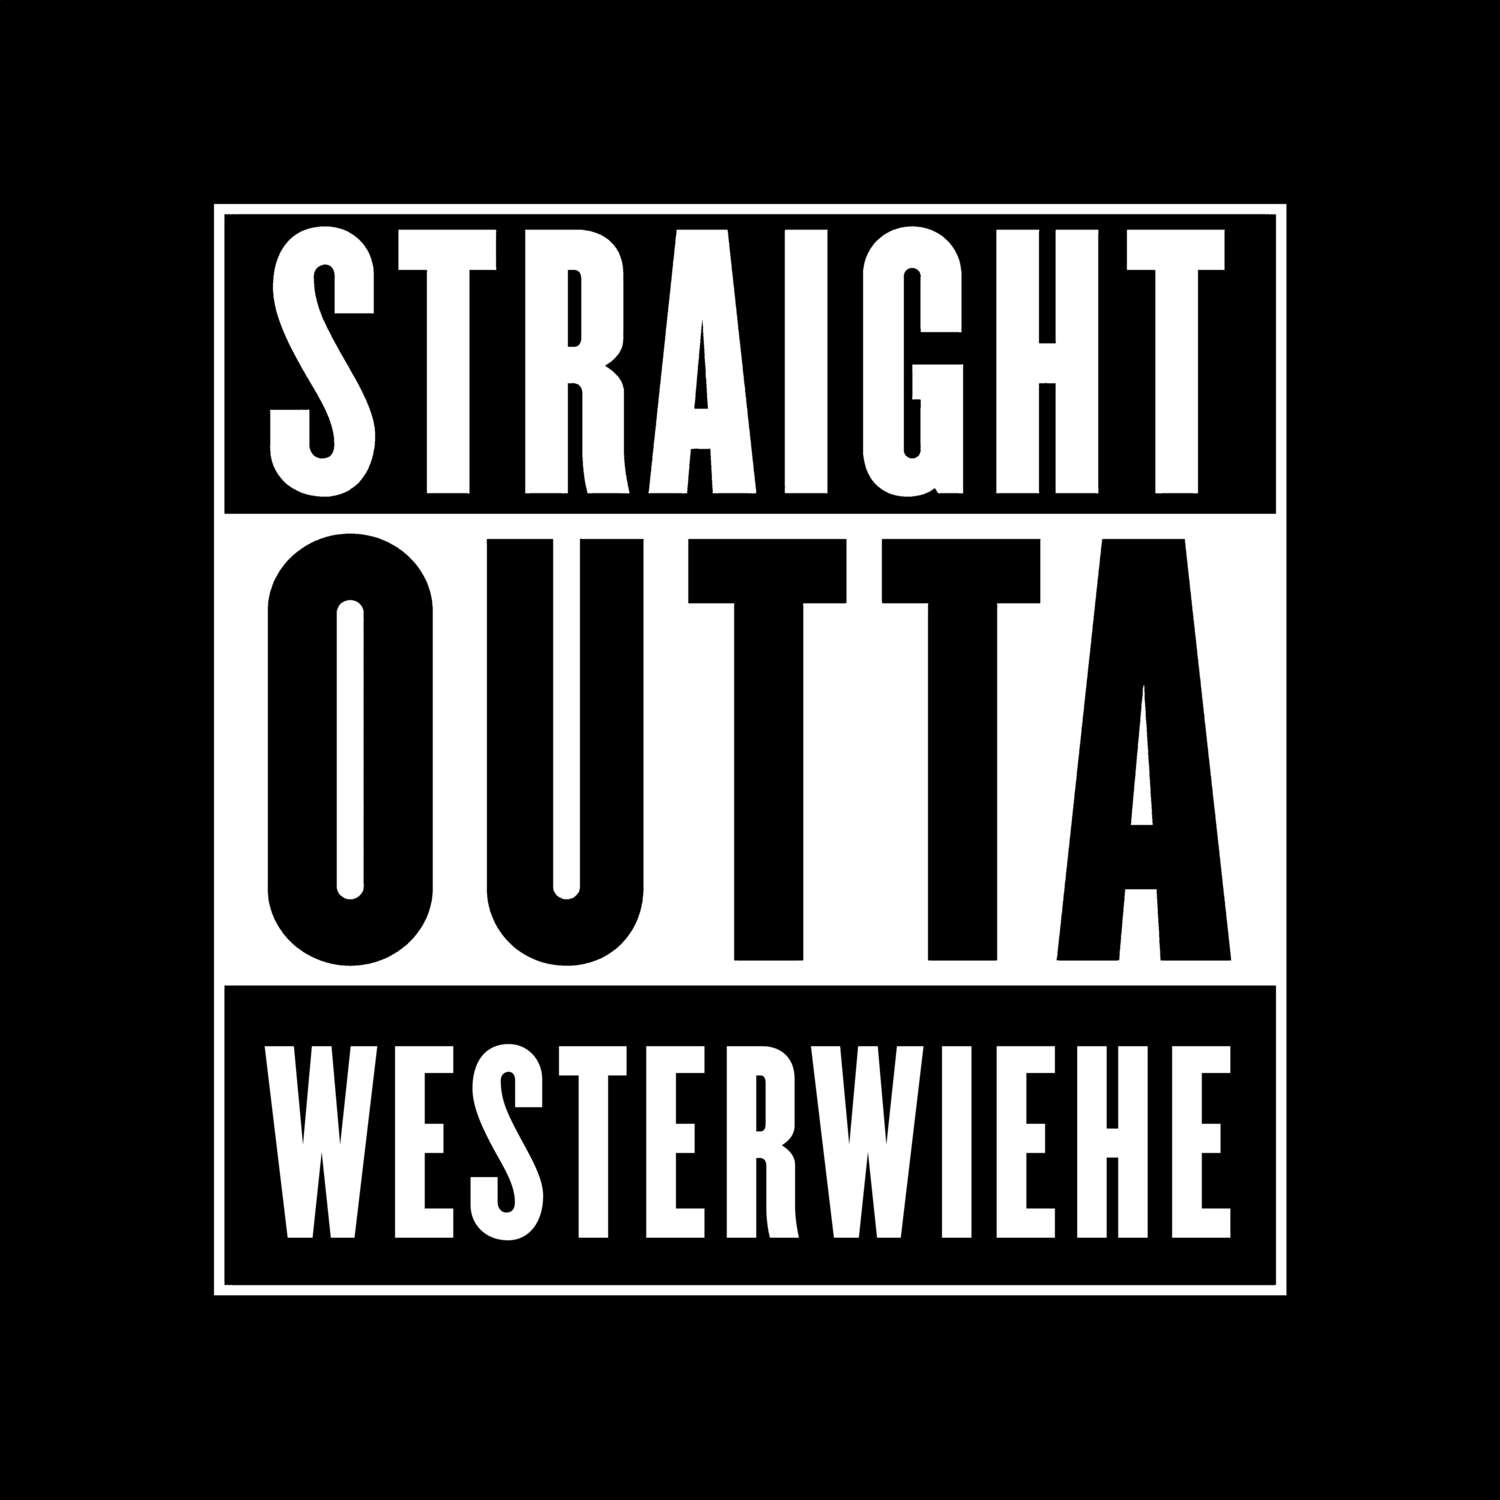 Westerwiehe T-Shirt »Straight Outta«